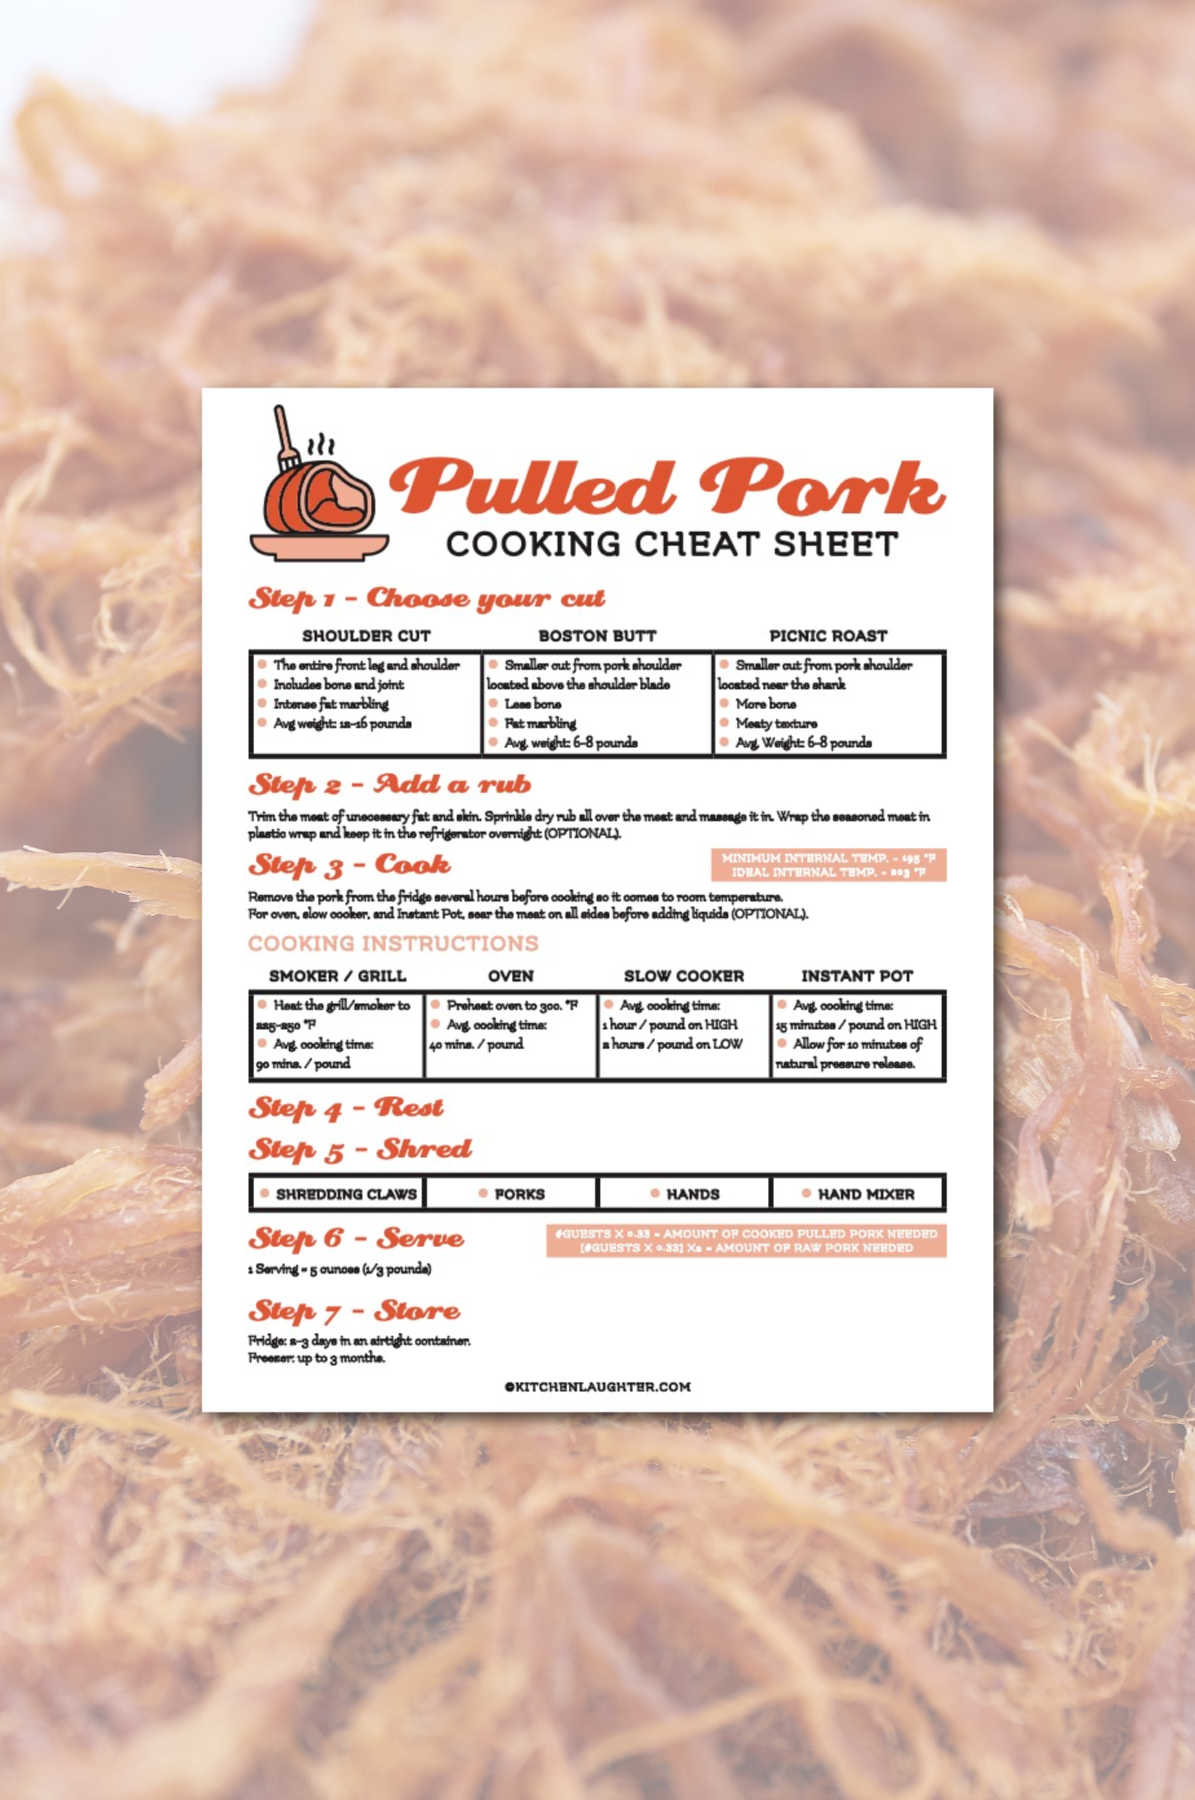 faded closeup of shredded pork in a dish with the pulled pork cooking cheat sheet overlayed.